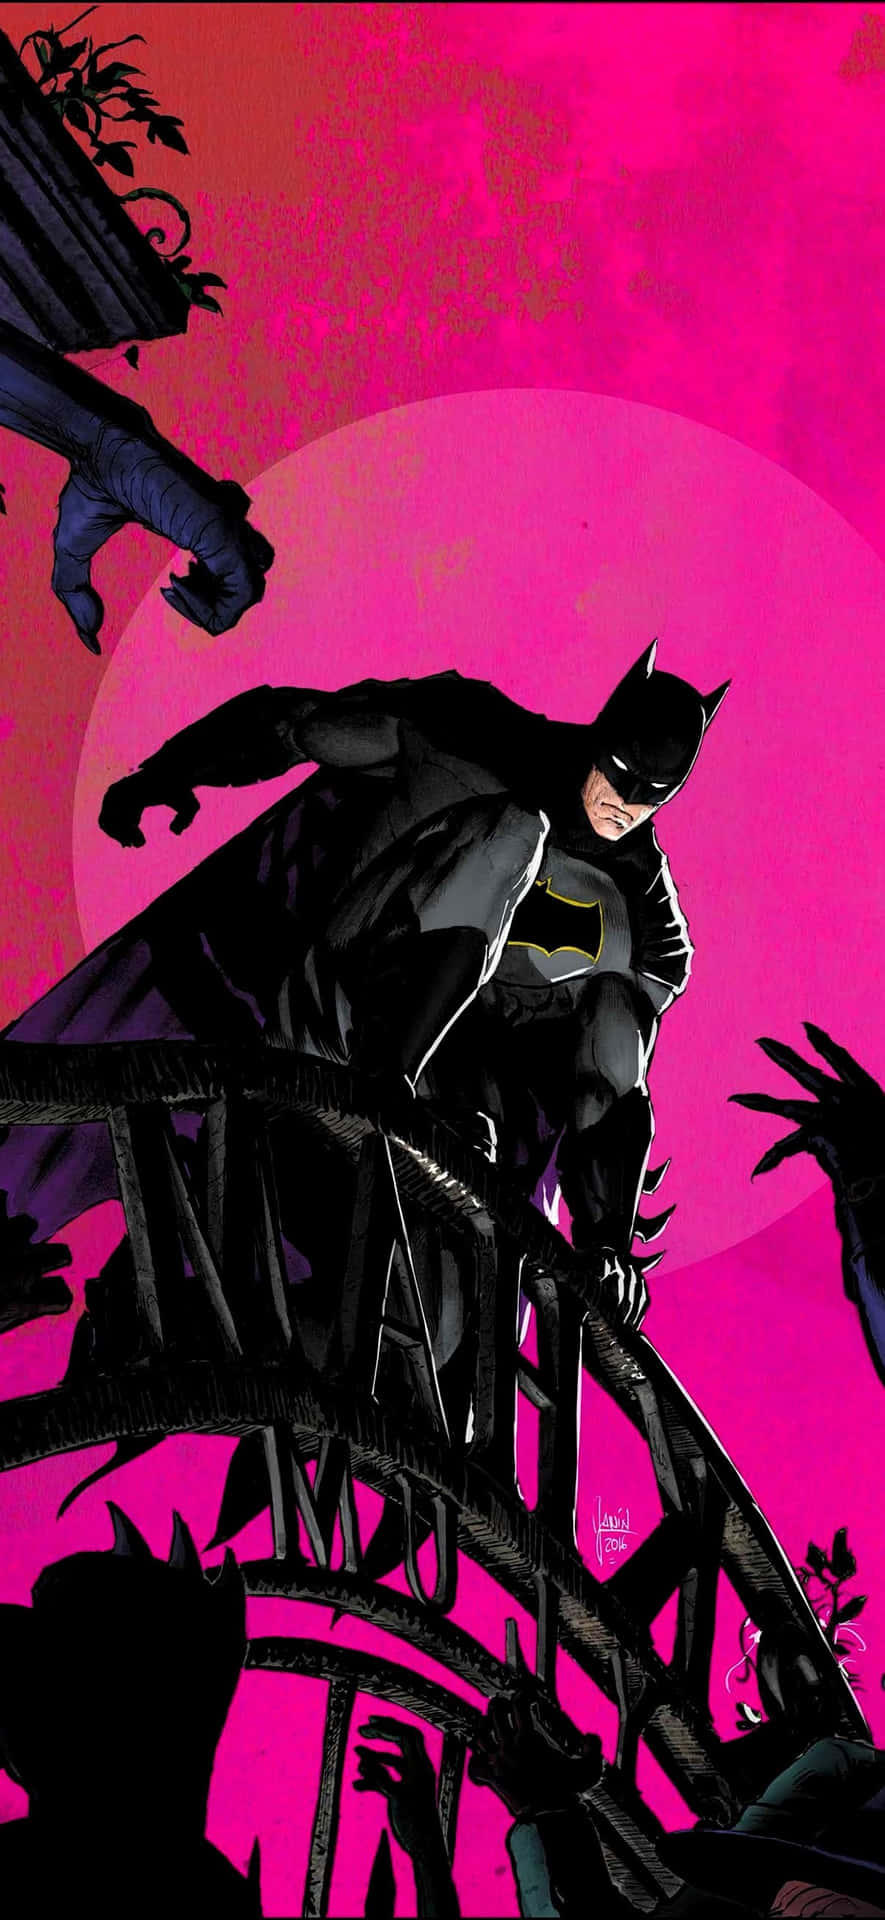 Show off your geek cred with the awesome Batman Iphone Wallpaper